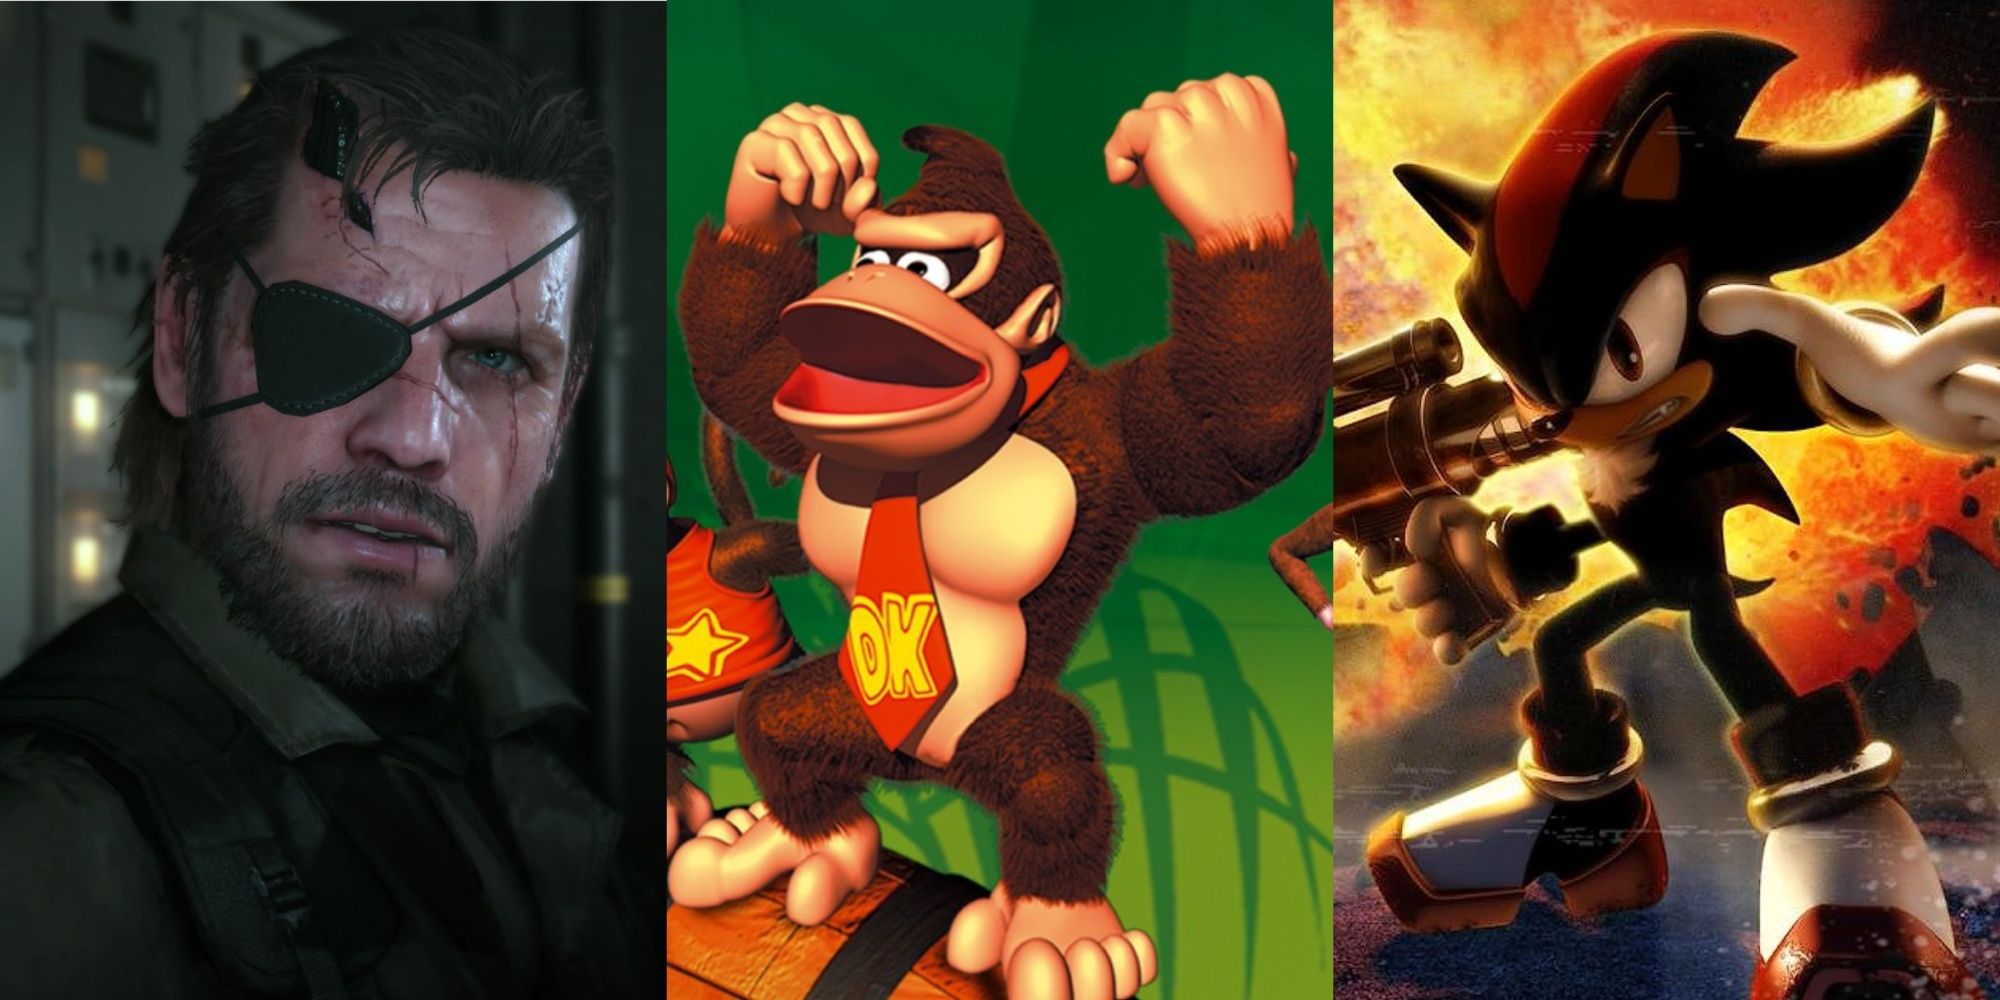 Video Game Villains Who Became Protagonists: Big Boss in Metal Gear Solid 5, Donkey Kong, and Shadow the Hedgehog